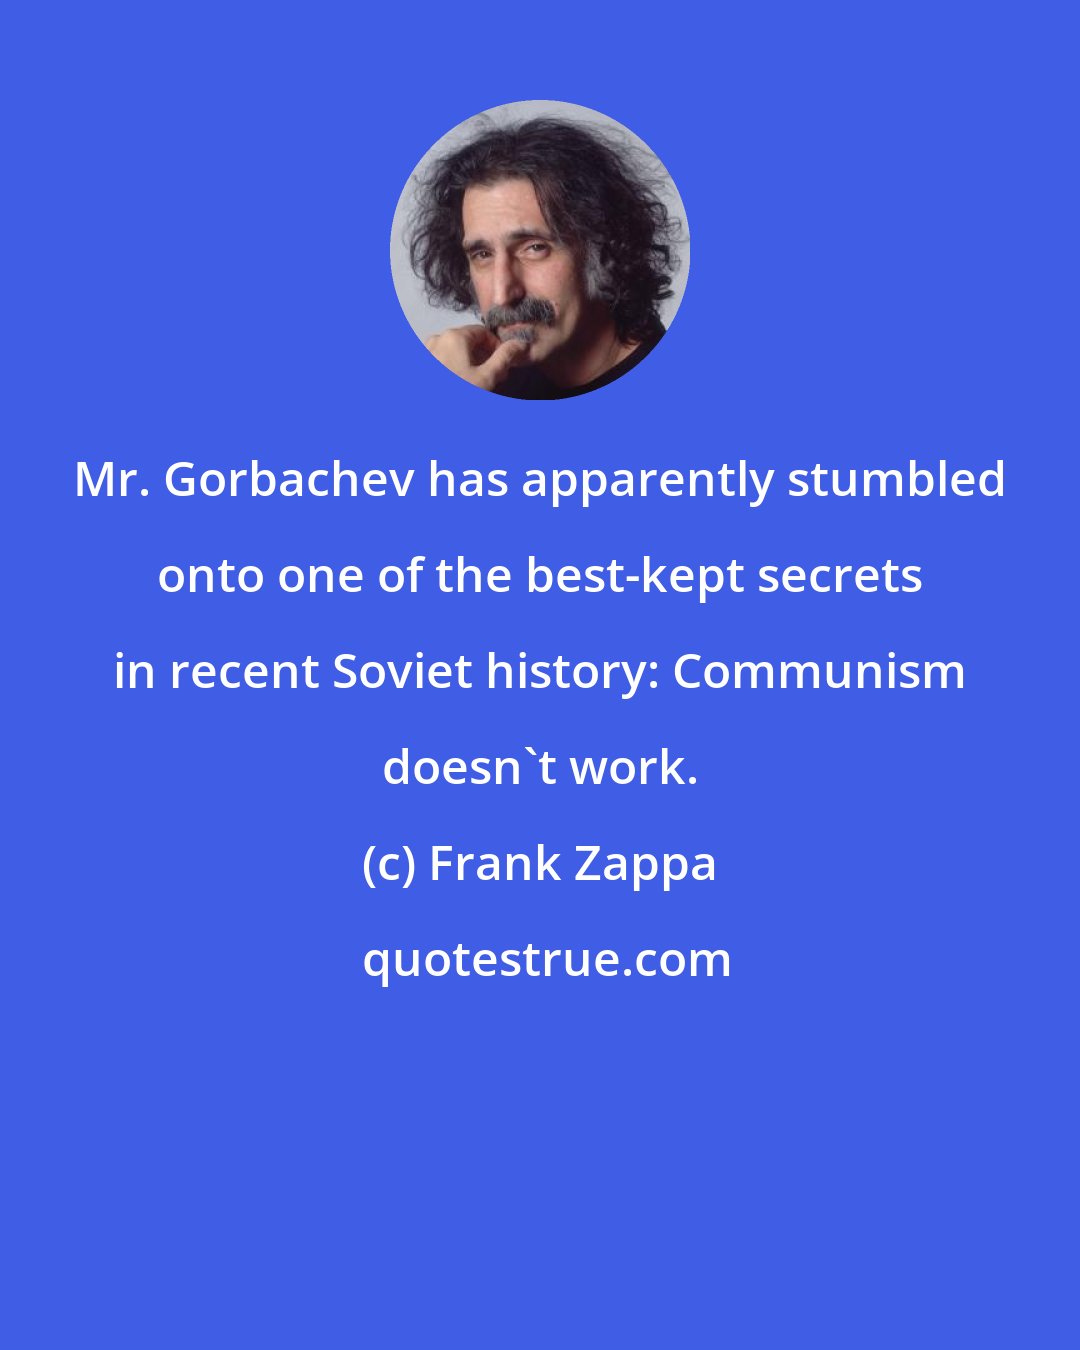 Frank Zappa: Mr. Gorbachev has apparently stumbled onto one of the best-kept secrets in recent Soviet history: Communism doesn't work.